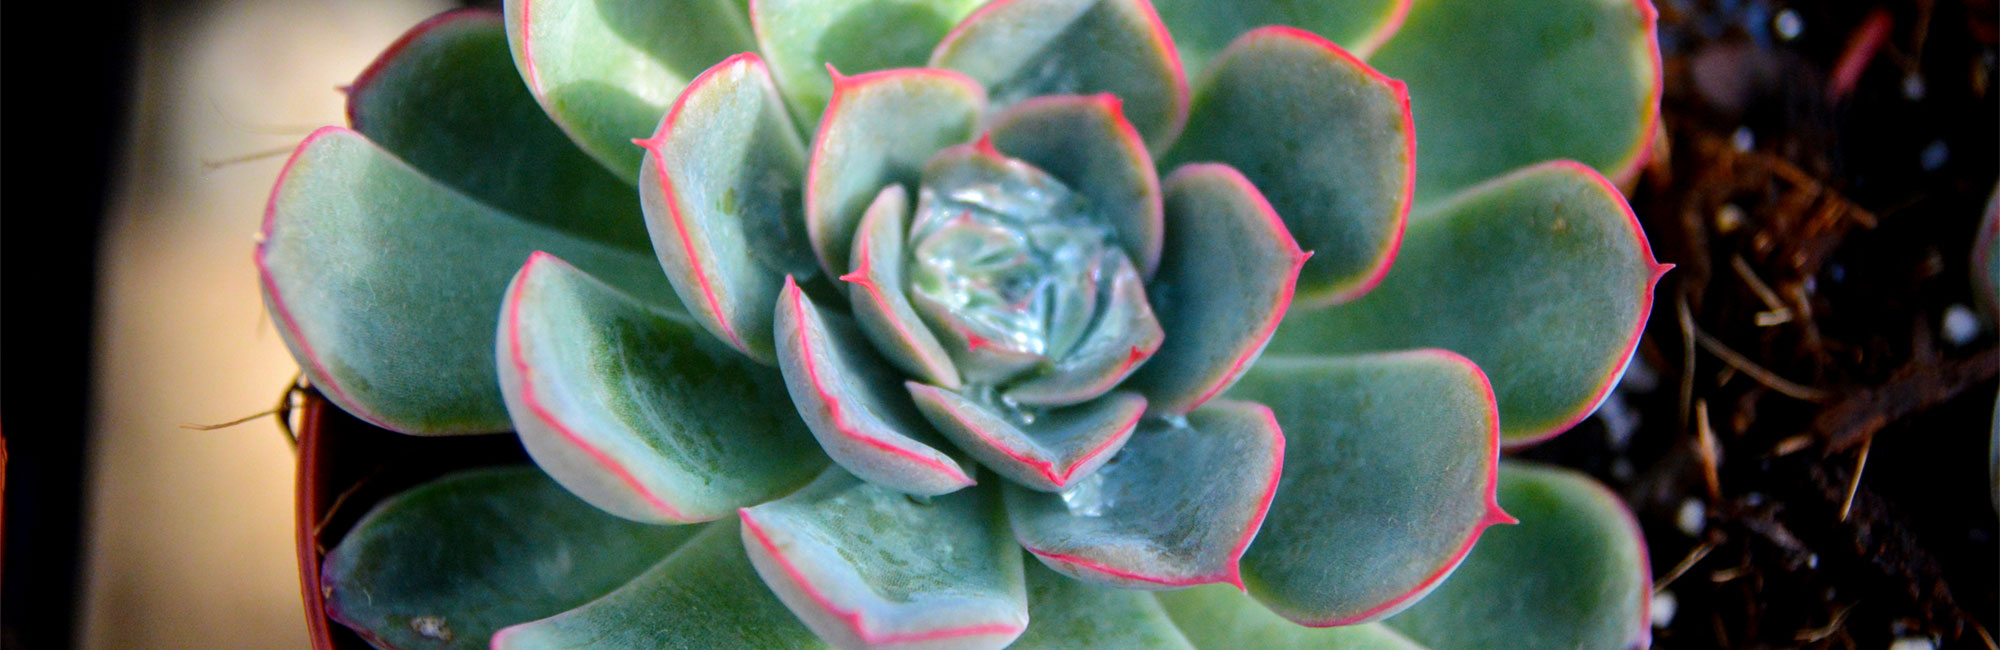 plainview-pure-growers-succulents-greenhouse-growers-new-jersey-van-vugt